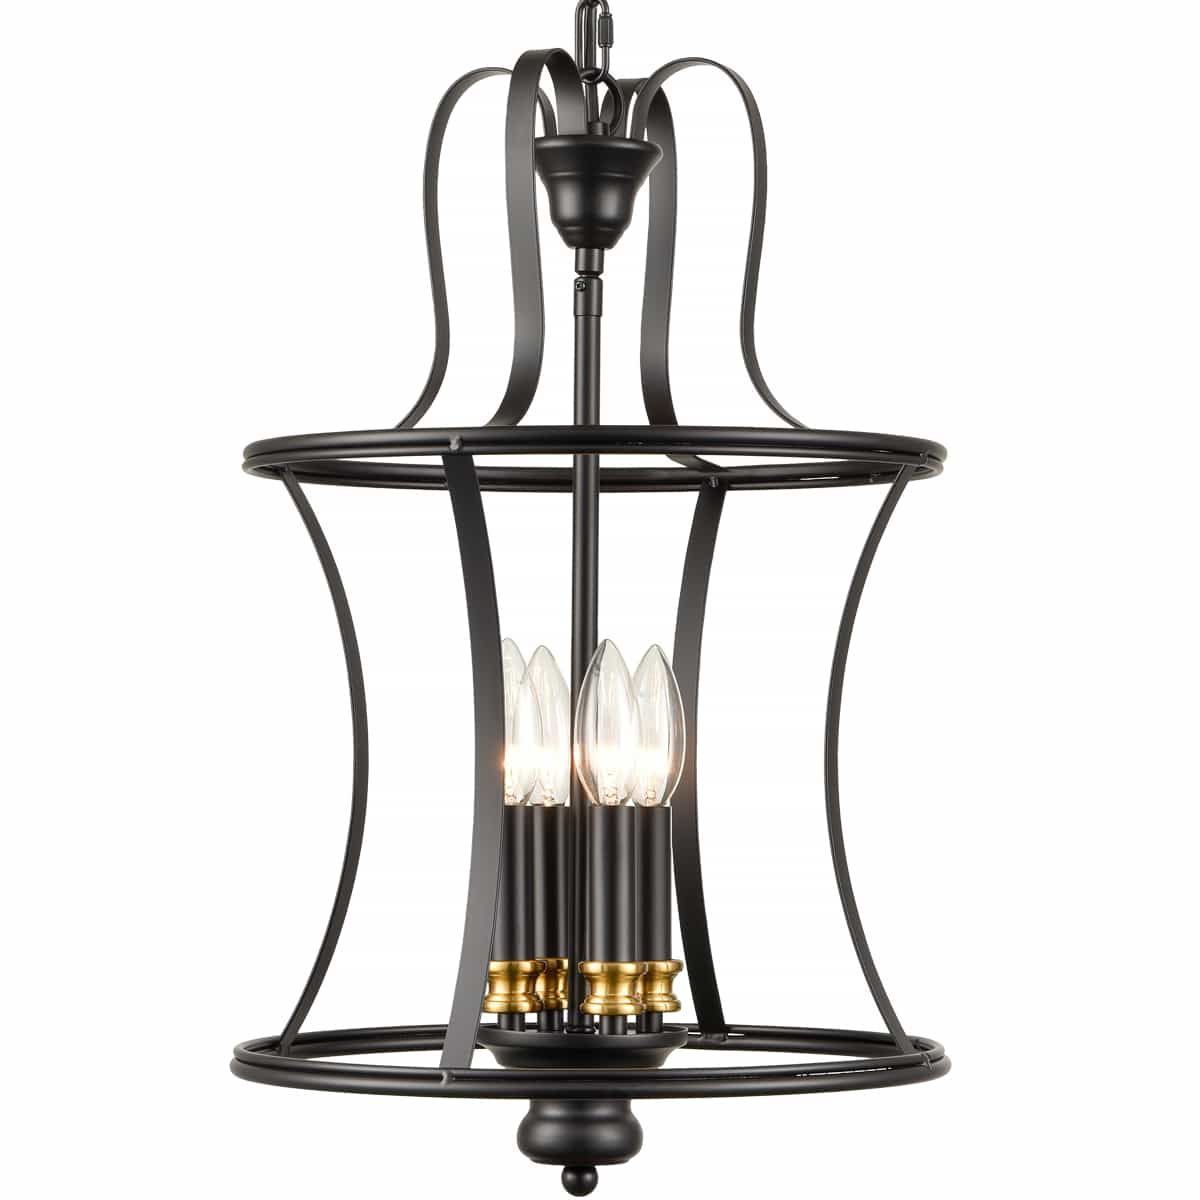 Black Iron Lantern Chandeliers Pertaining To 2019 Black Lantern Metal Pendant Light Chandelier  4 Light (View 6 of 10)